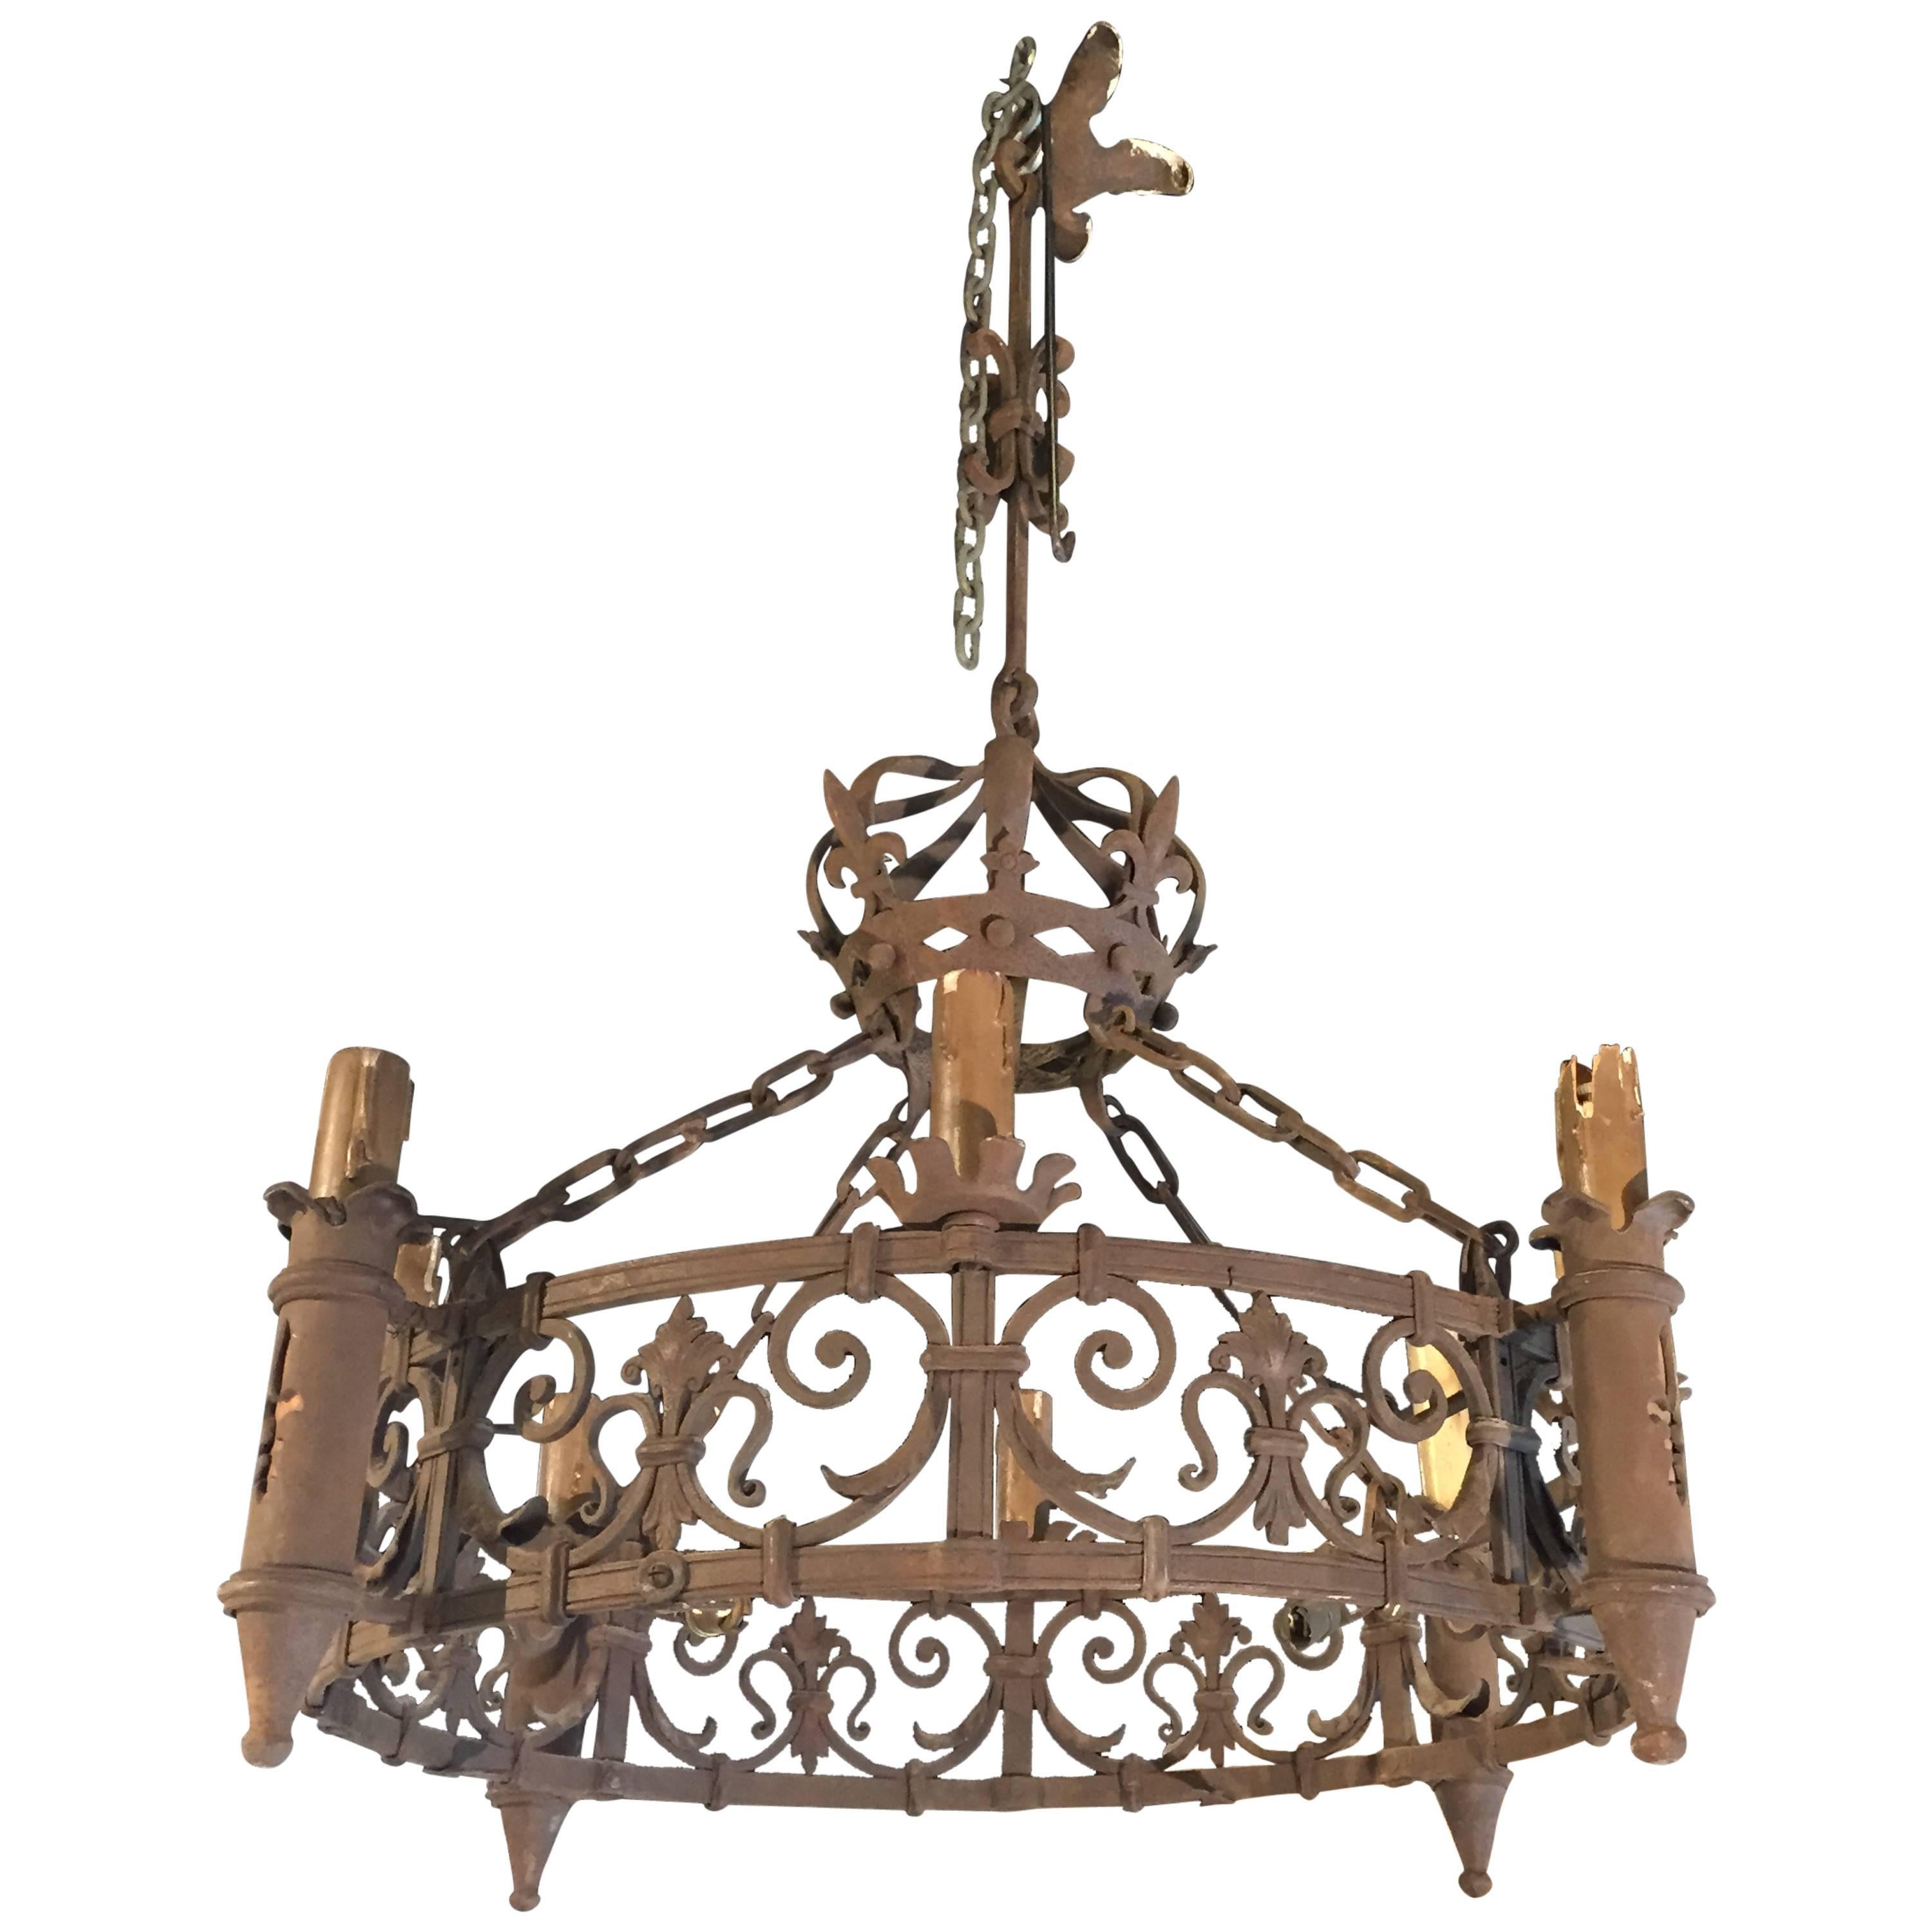 Antique French Forged Iron Chandelier with Fleur de Lys Motifs 